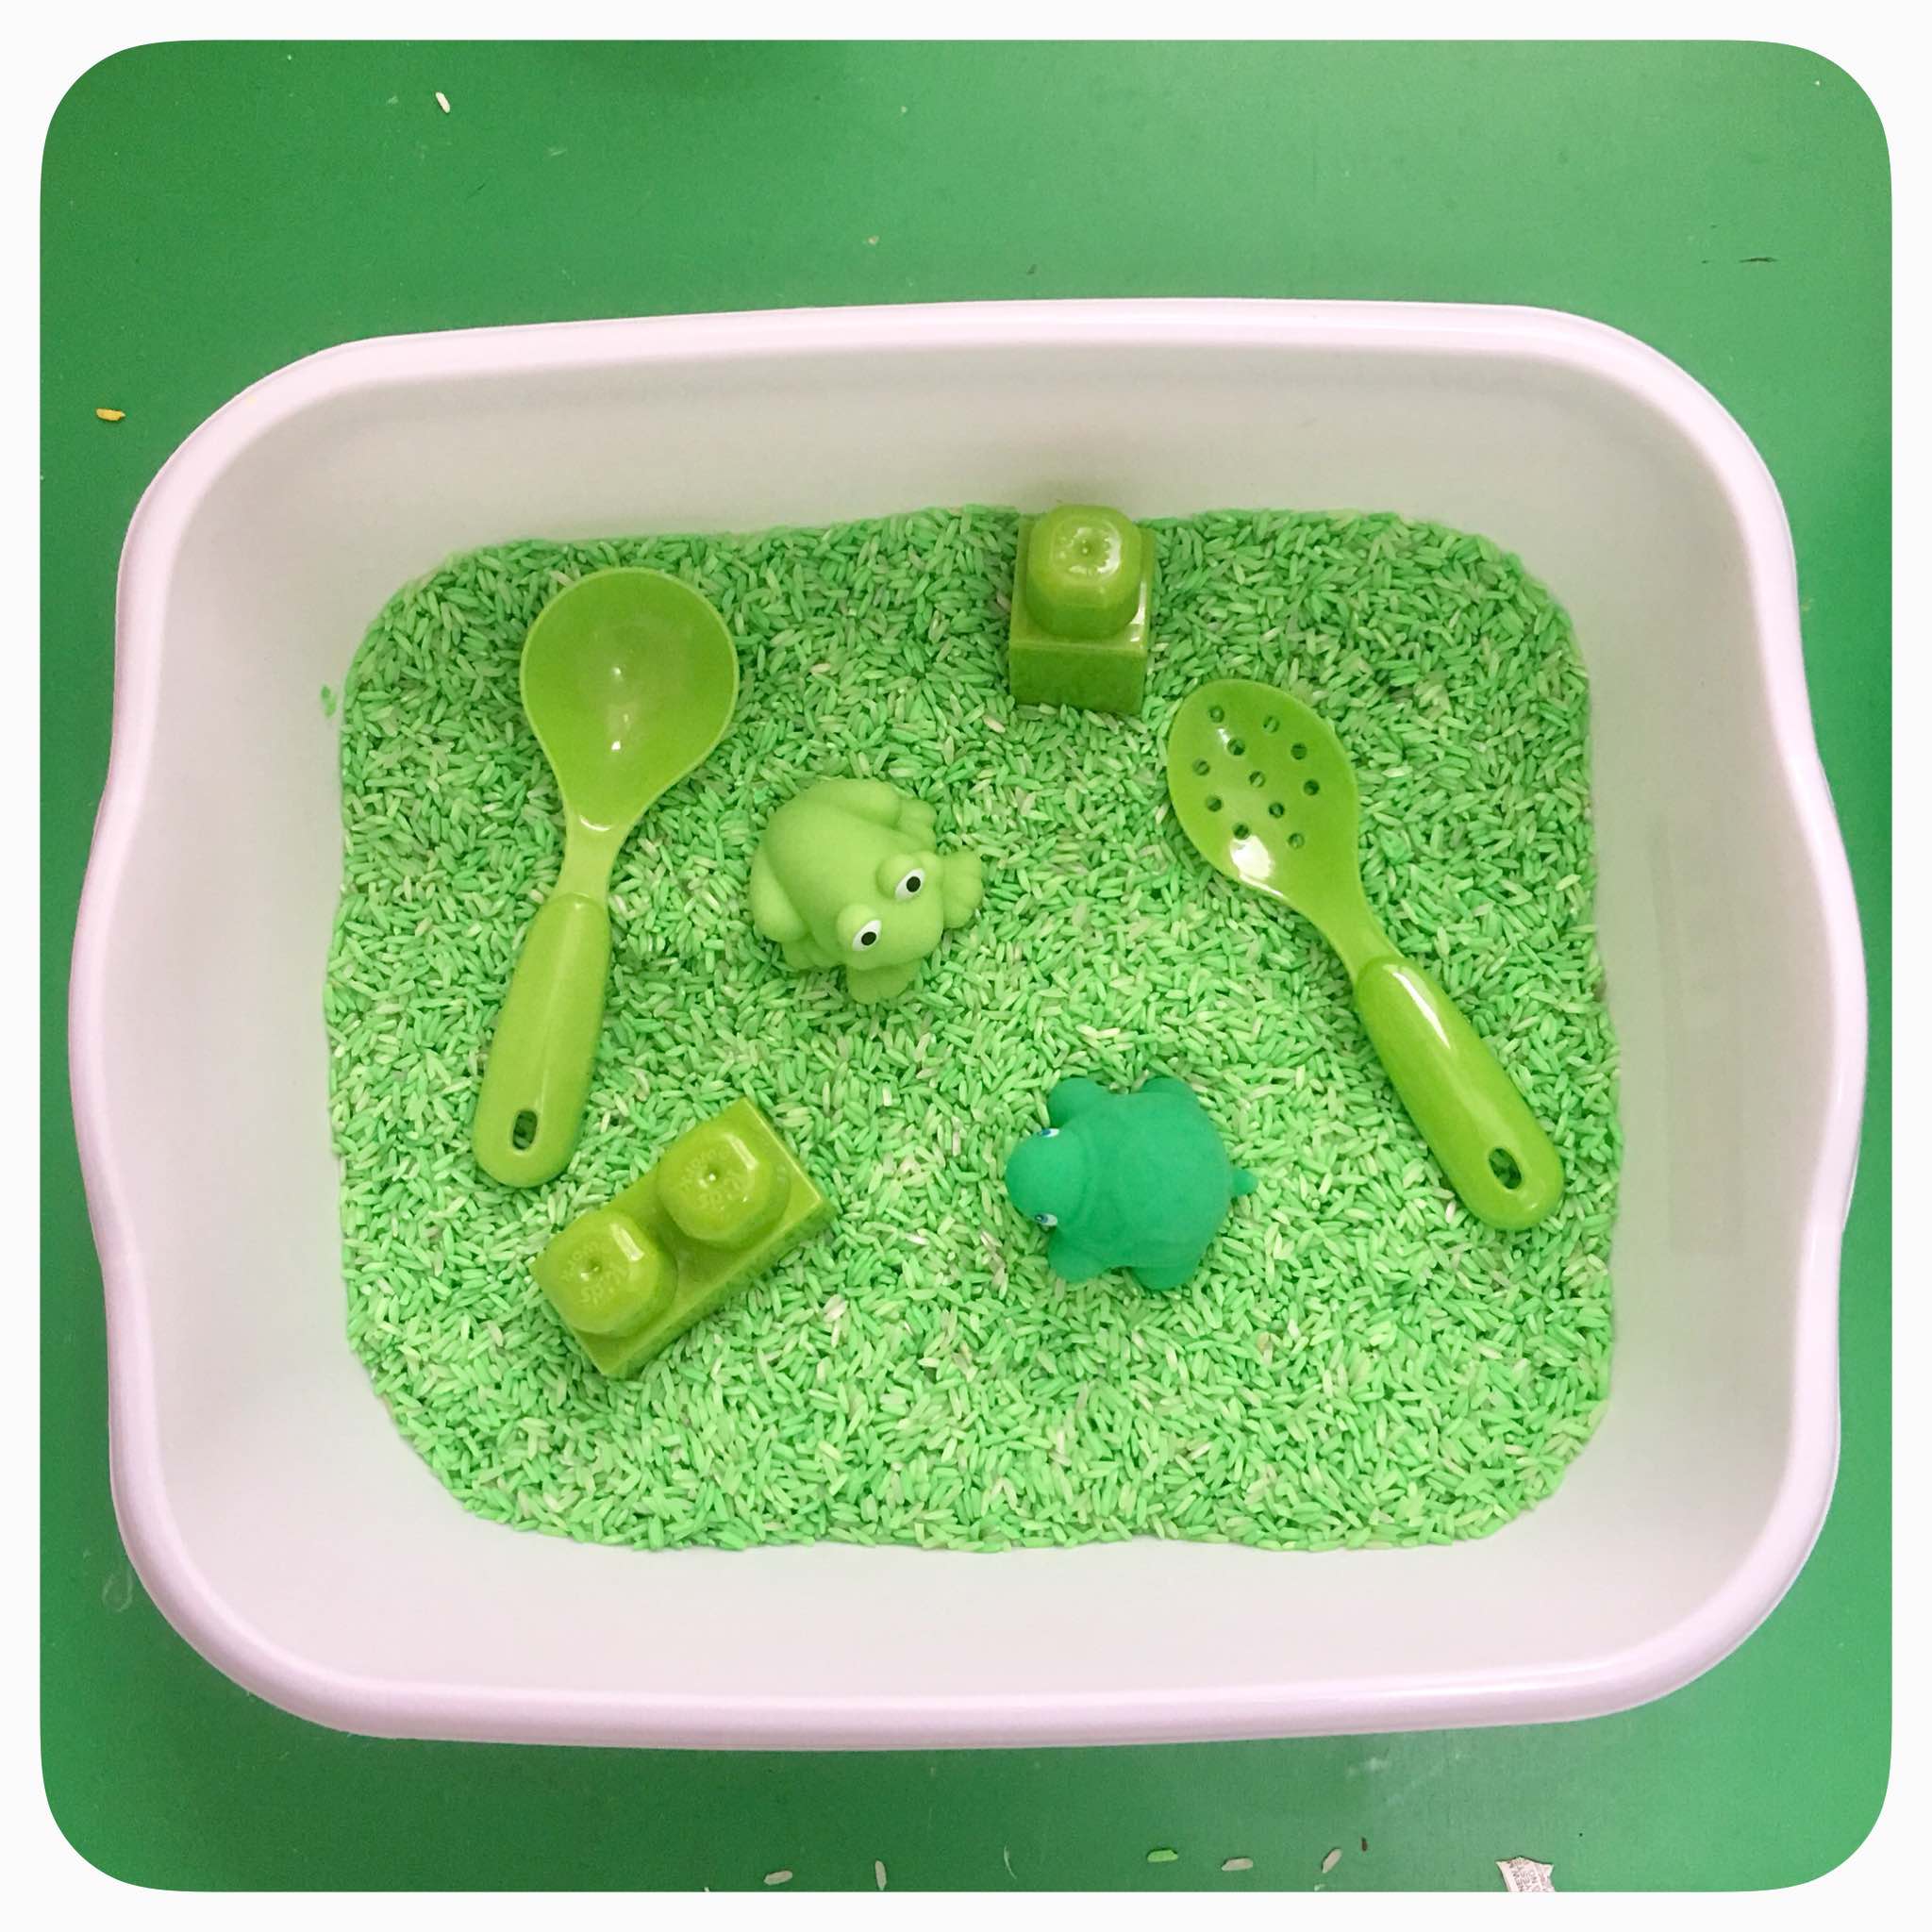 Toddler Sensory Bin - Amazing how much play kids can get out of such simple sensory materials. Acrylic paints to dye the rice .